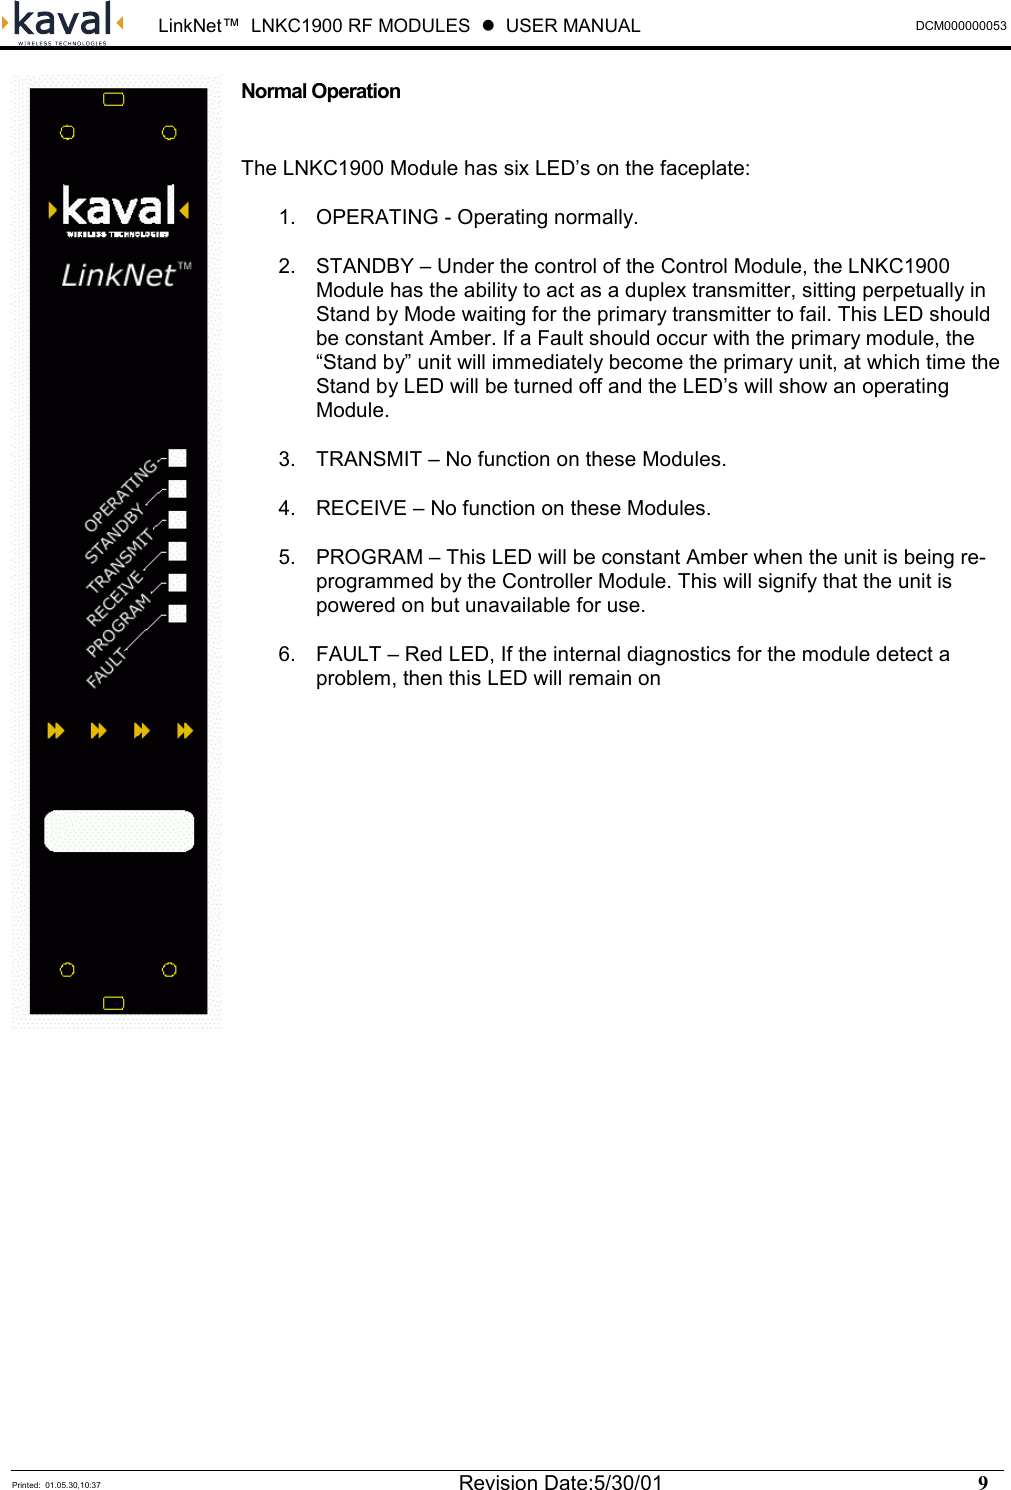  LinkNet™  LNKC1900 RF MODULES  !  USER MANUAL DCM000000053   Printed:  01.05.30,10:37  Revision Date:5/30/01    9   Normal Operation  The LNKC1900 Module has six LED’s on the faceplate: 1.  OPERATING - Operating normally. 2.  STANDBY – Under the control of the Control Module, the LNKC1900 Module has the ability to act as a duplex transmitter, sitting perpetually in Stand by Mode waiting for the primary transmitter to fail. This LED should be constant Amber. If a Fault should occur with the primary module, the “Stand by” unit will immediately become the primary unit, at which time the Stand by LED will be turned off and the LED’s will show an operating Module. 3.  TRANSMIT – No function on these Modules. 4.  RECEIVE – No function on these Modules. 5.  PROGRAM – This LED will be constant Amber when the unit is being re-programmed by the Controller Module. This will signify that the unit is powered on but unavailable for use. 6.  FAULT – Red LED, If the internal diagnostics for the module detect a problem, then this LED will remain on               